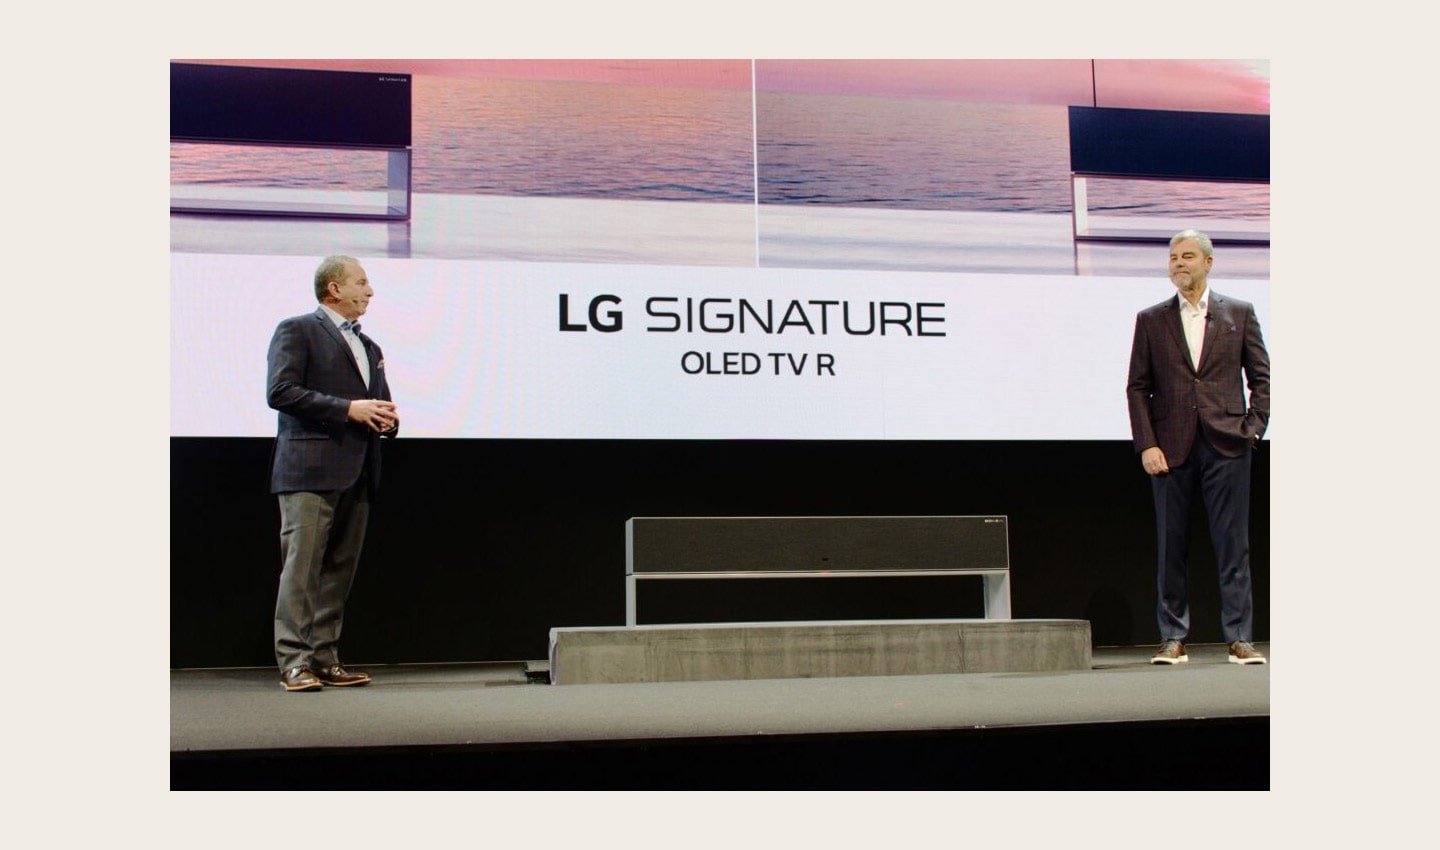 David VanderWall, Senior Vice President of Marketing at LG Electronics USA and Tim Alessi Senior Director of Product Marketing for Home Entertainment Products at LG Electronics USA introduce the LG SIGNATURE OLED TV R at LG's CES 2019 Press Conference while putting the TV between them.